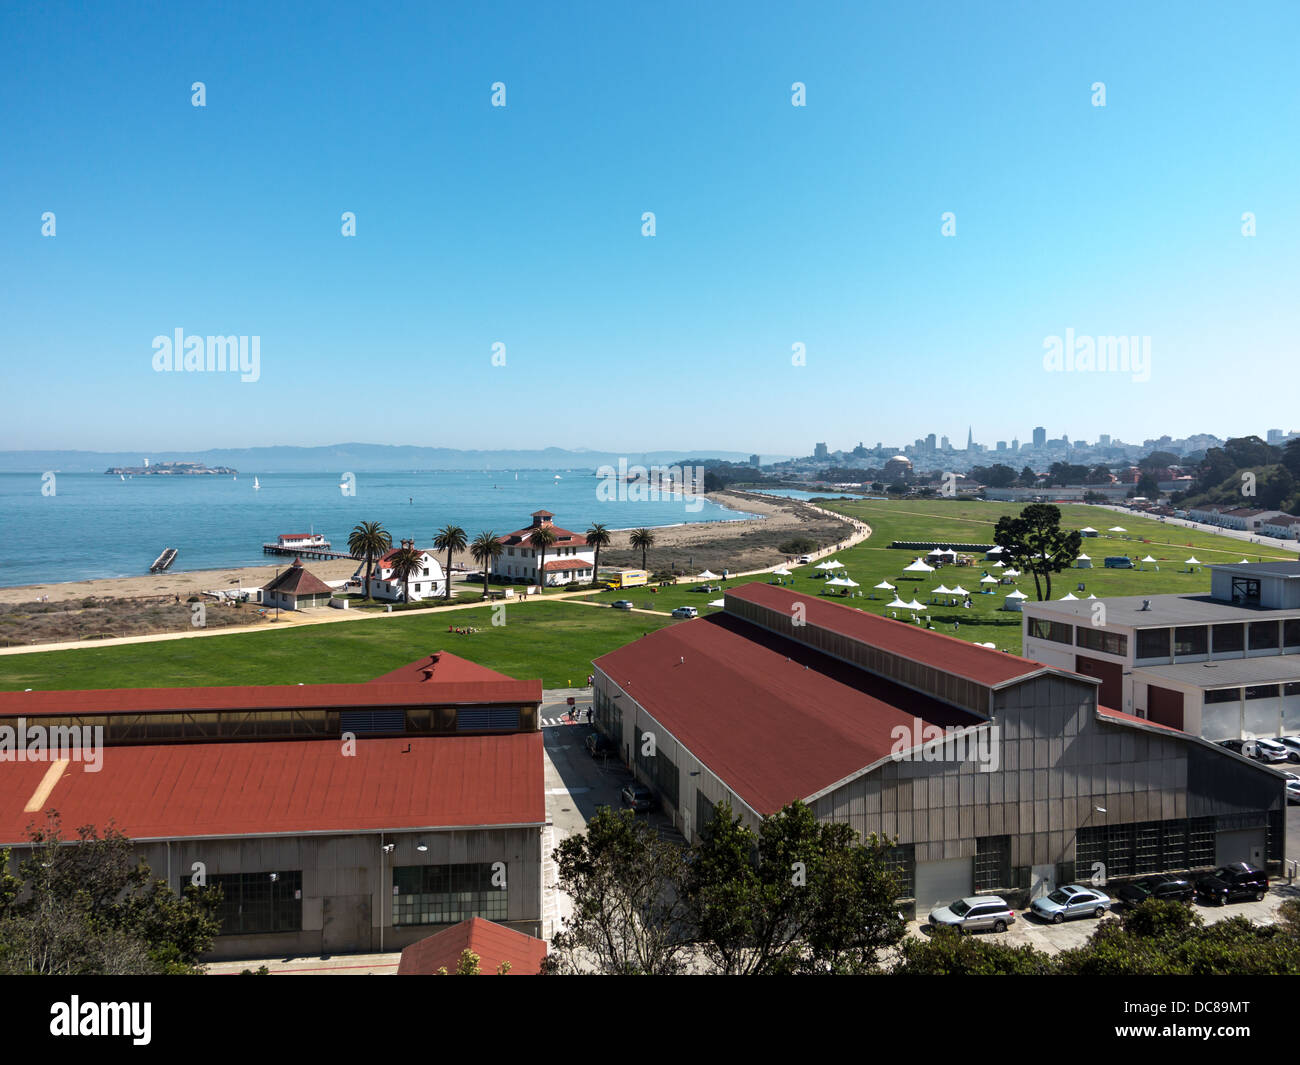 Aerial view of the Presidio Commissary and surrounding park stretching along the coast of San Francisco Bay  in California Stock Photo